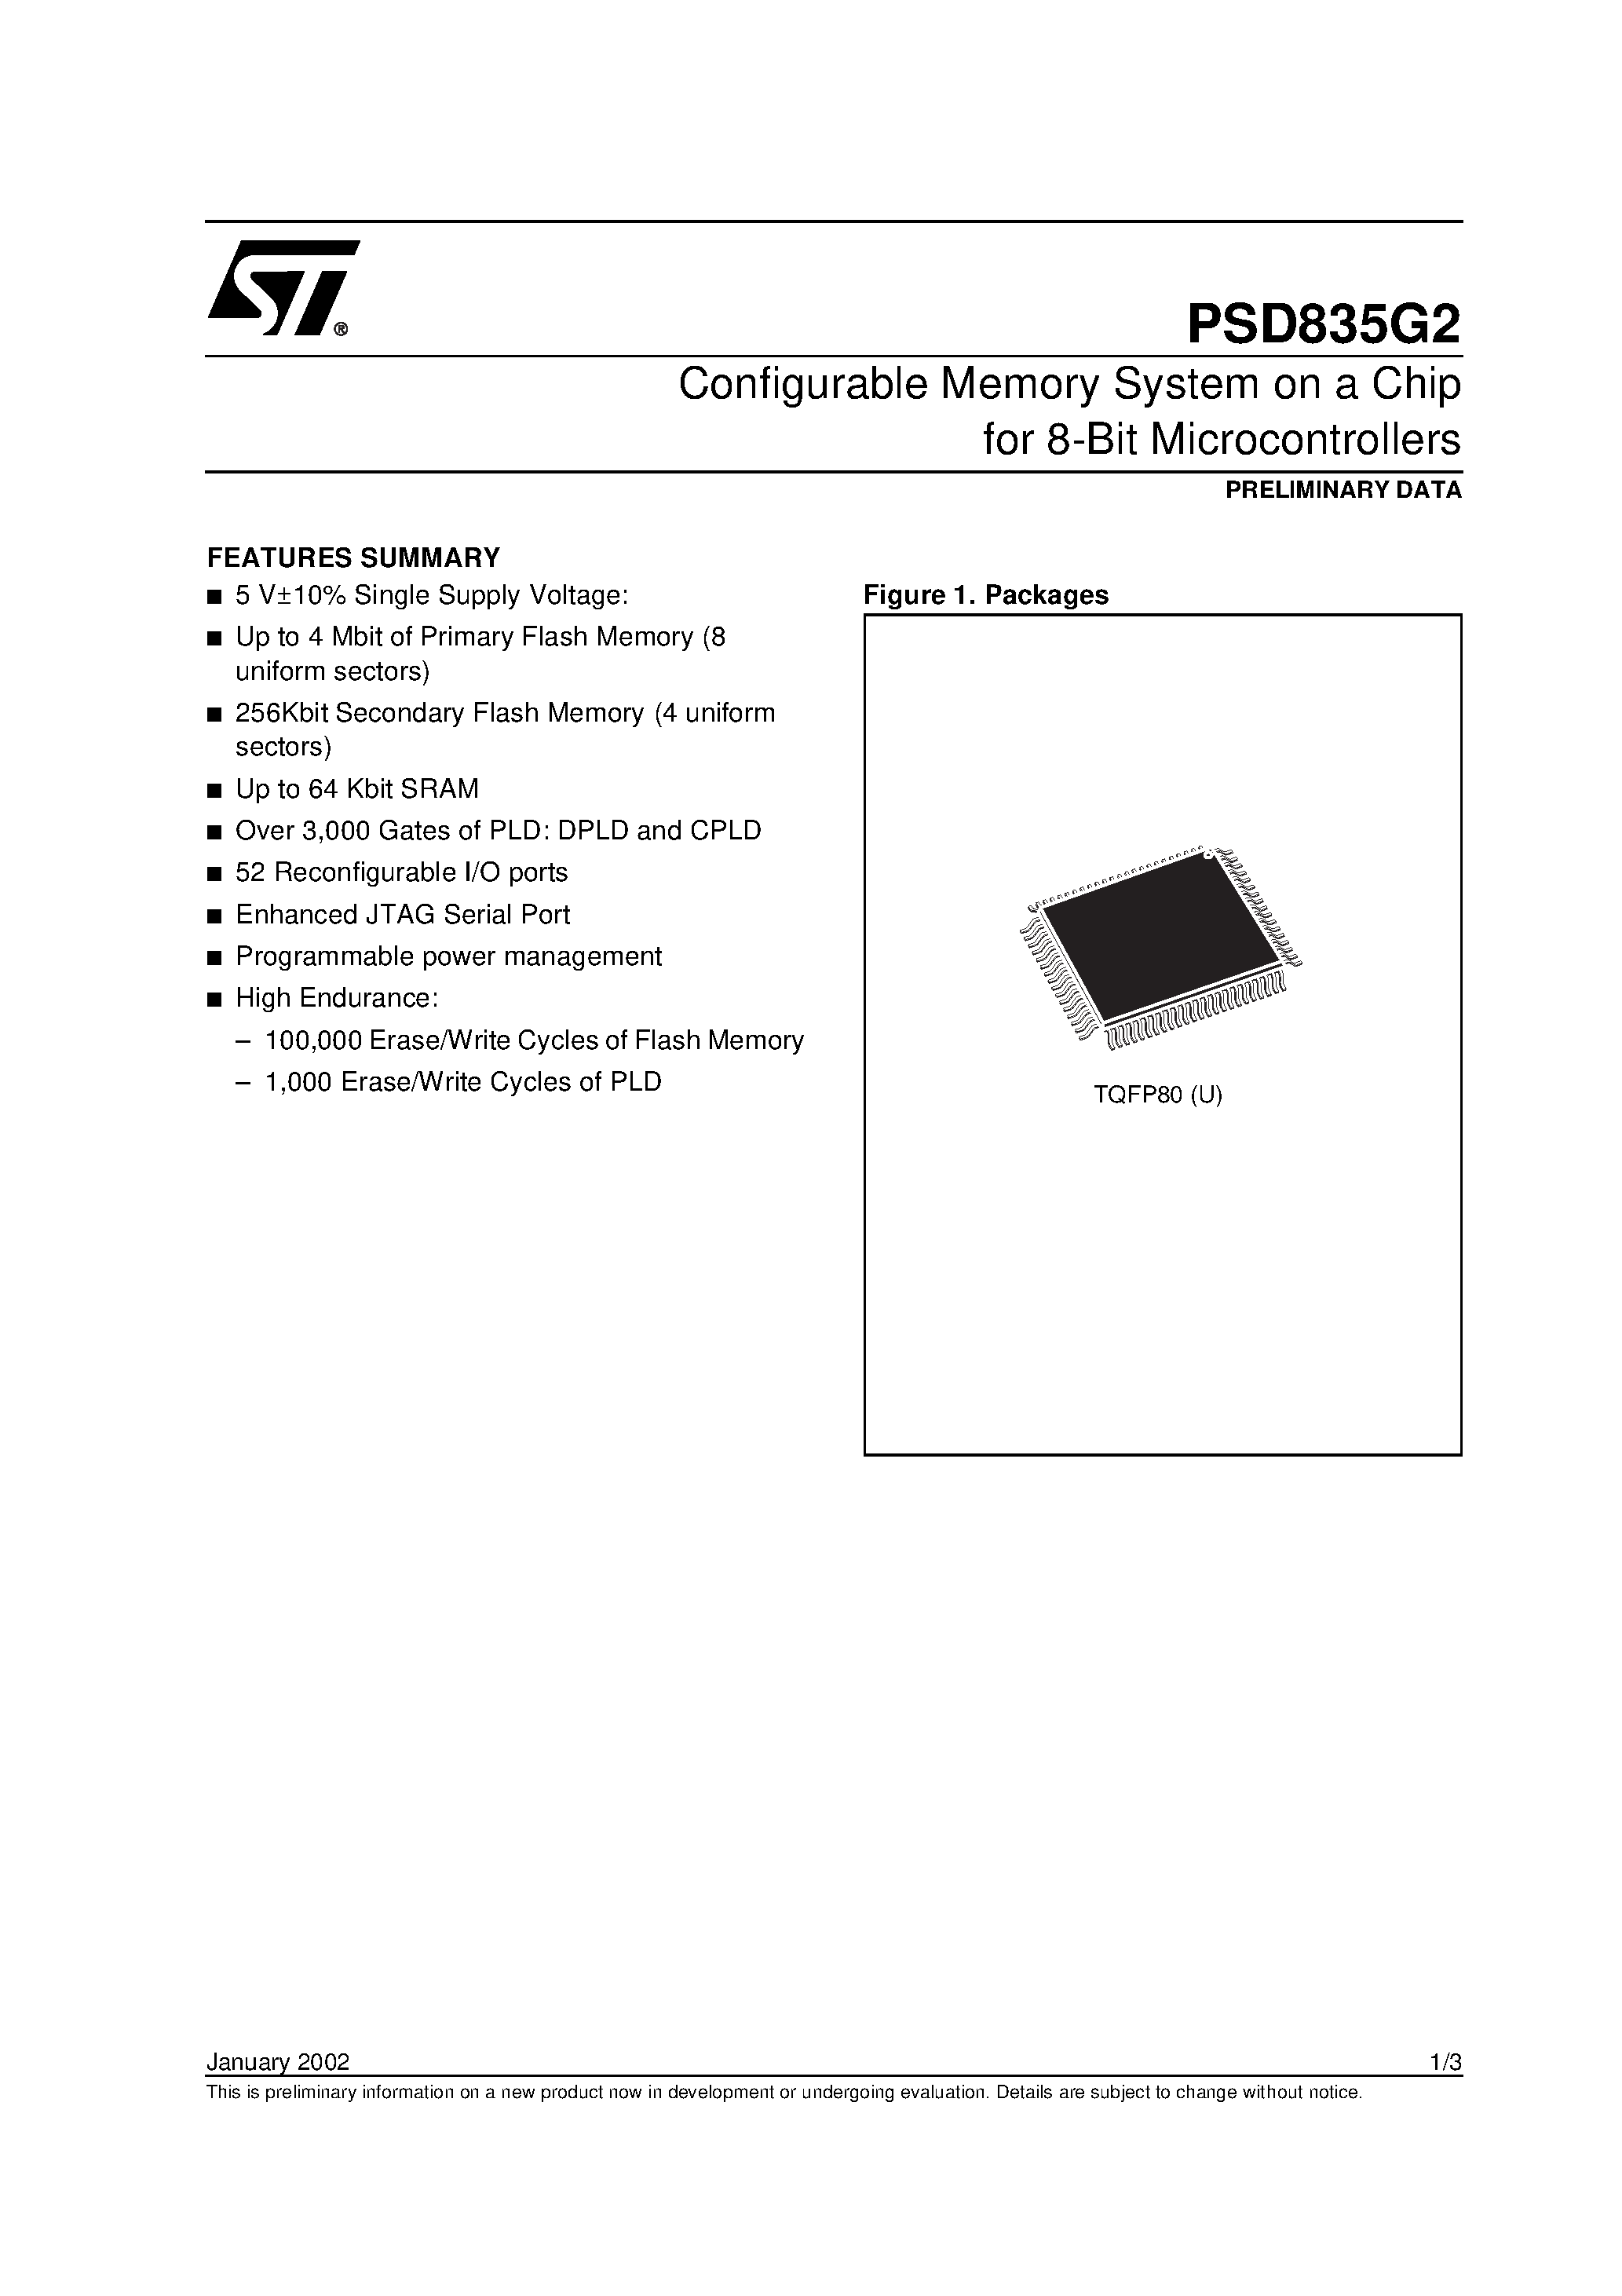 Datasheet PSD835F1-A-90J - Configurable Memory System on a Chip for 8-Bit Microcontrollers page 1